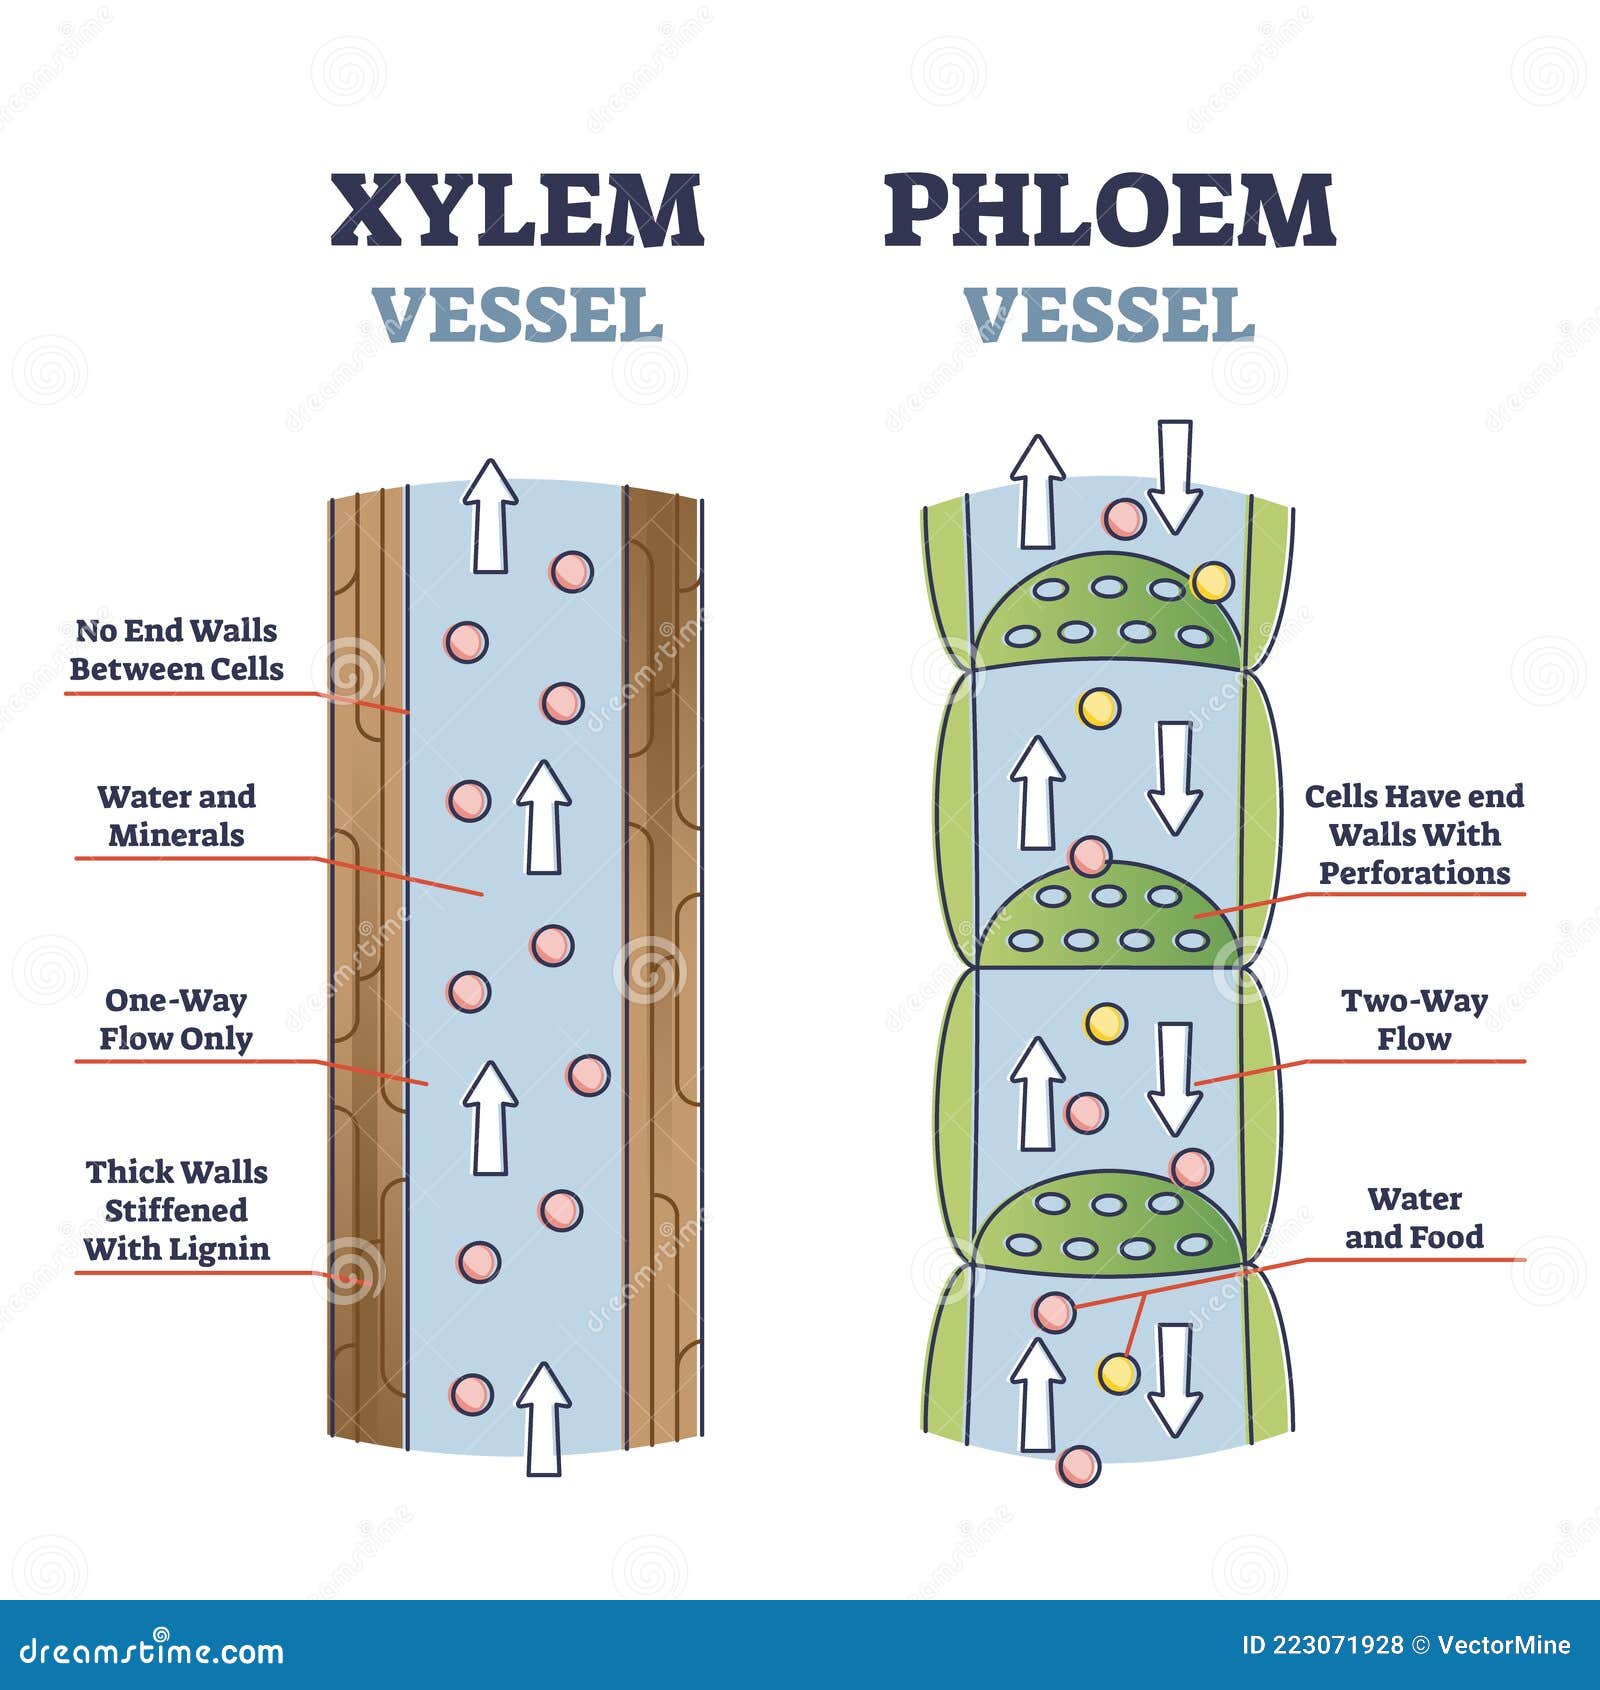 xylem and phloem water and minerals transportation system outline diagram